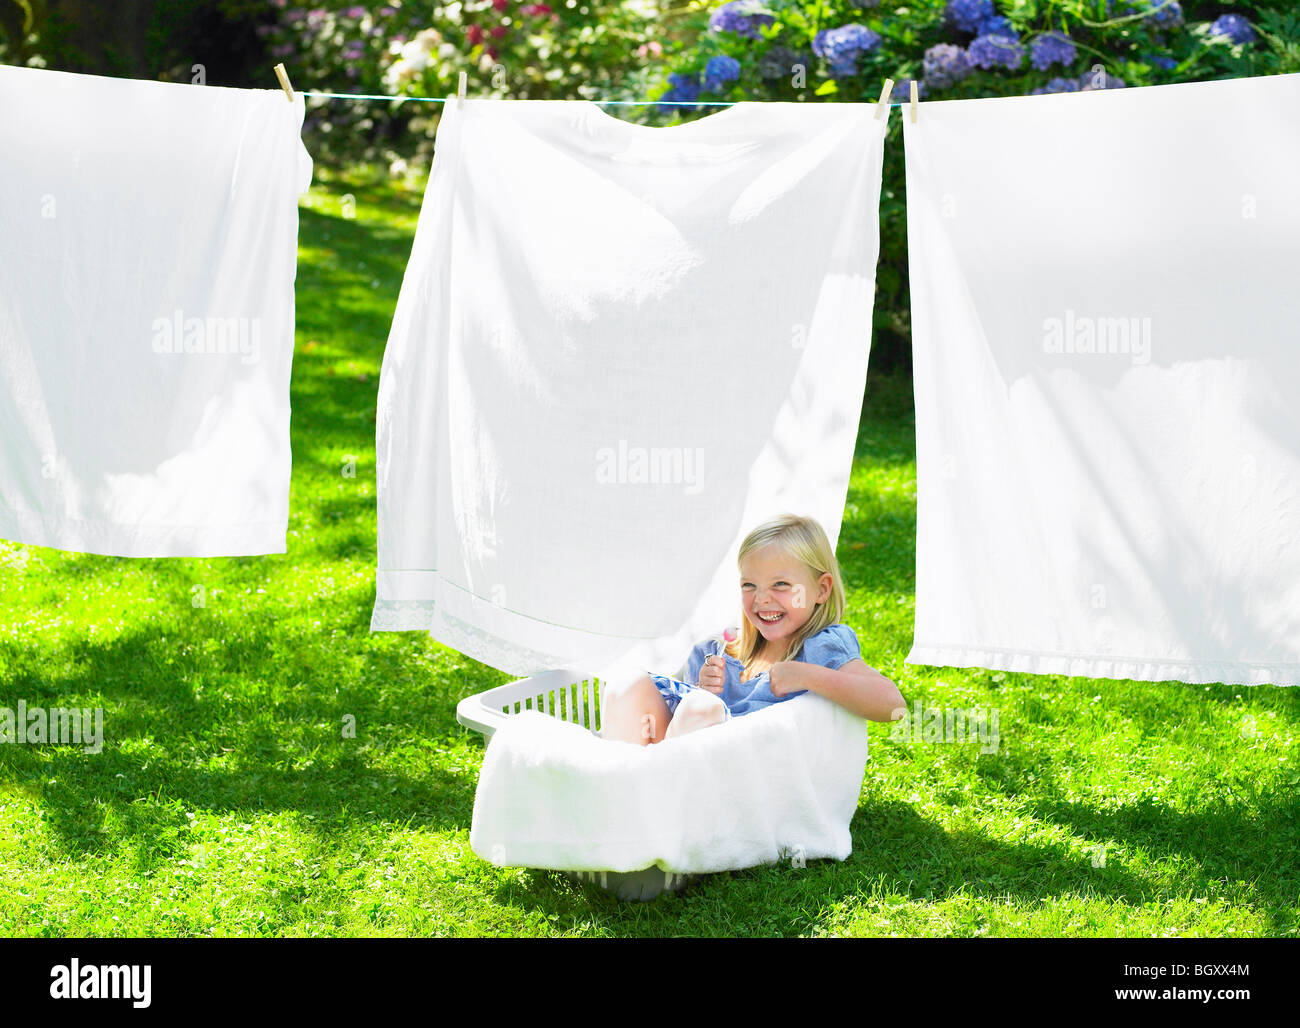 Girl playing in the laundry basket Stock Photo